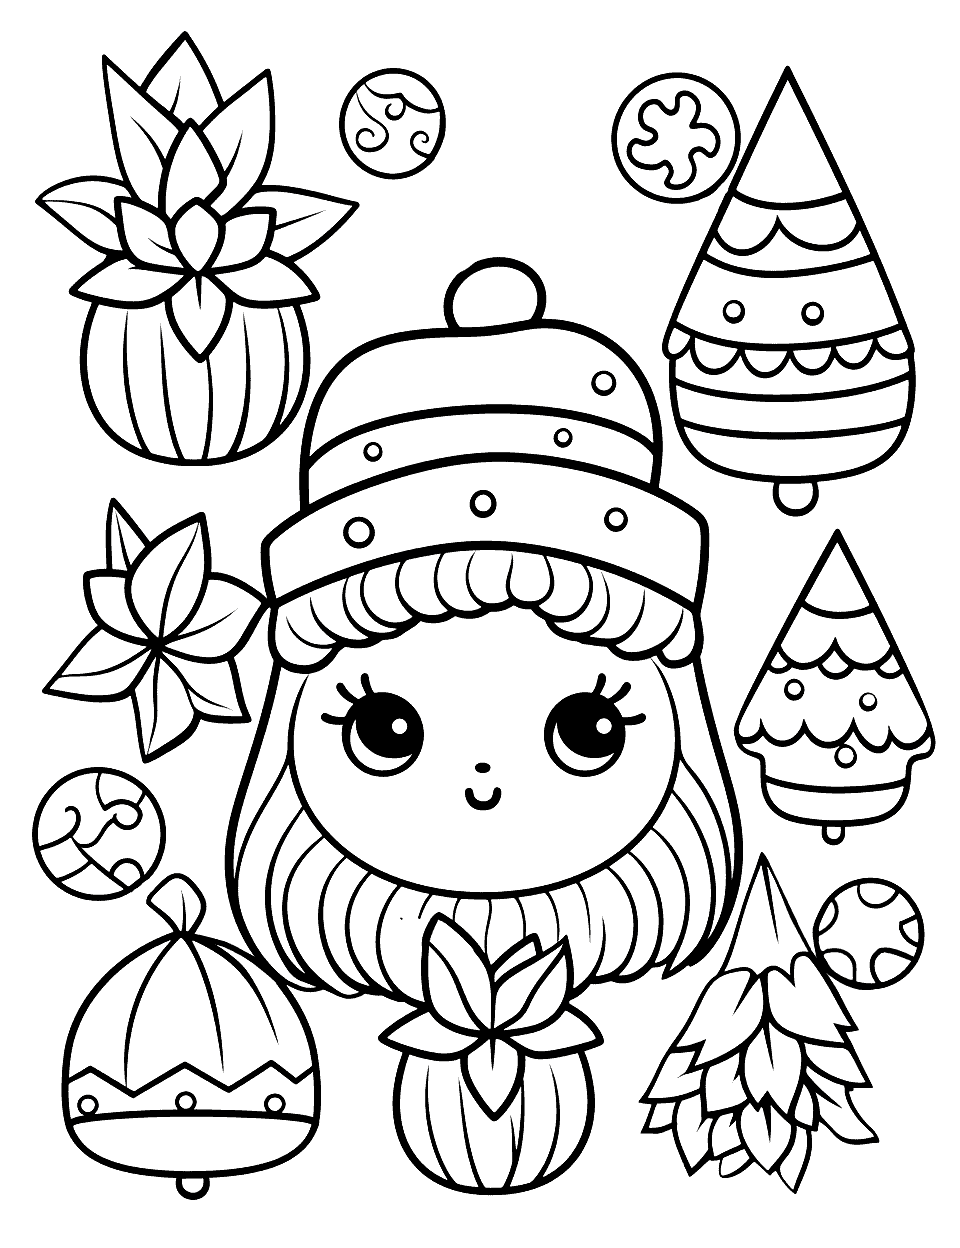 Kawaii Christmas Adult Coloring Page - An adult-friendly coloring page filled with cute kawaii-style Christmas elements.